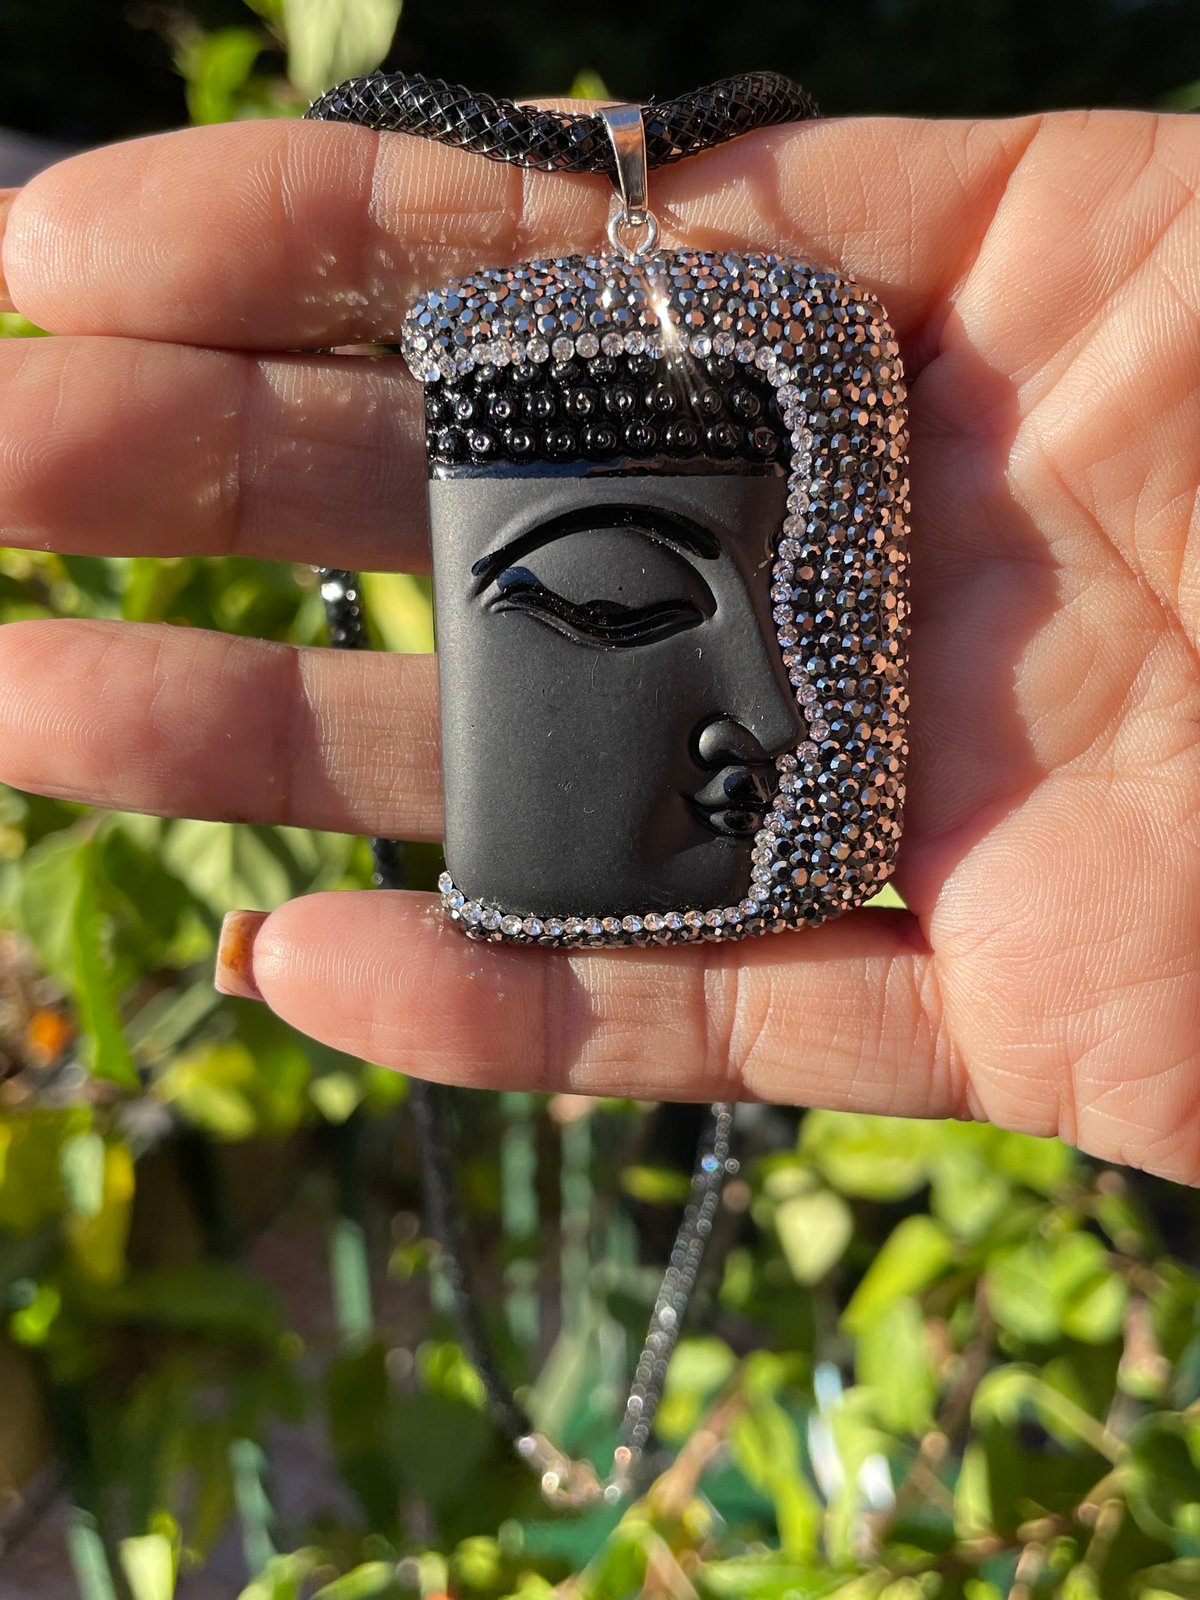 Black Buddha face with Hematite crystals